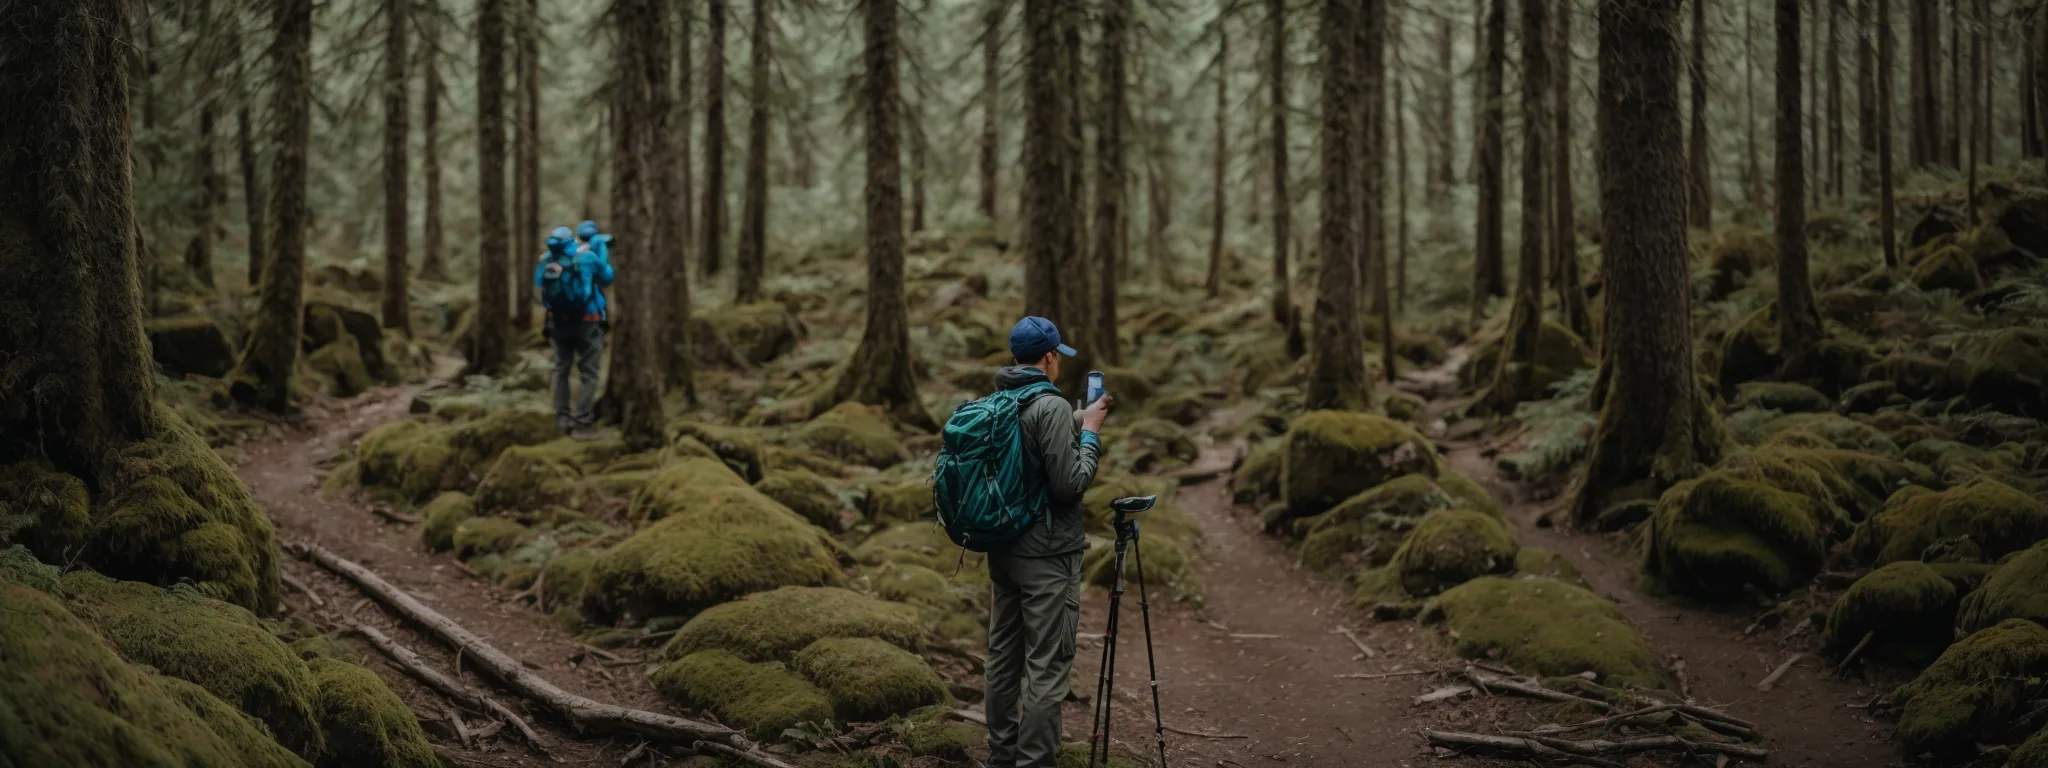 a hiker uses a smartphone to search for outdoor gear while trekking a forest trail.